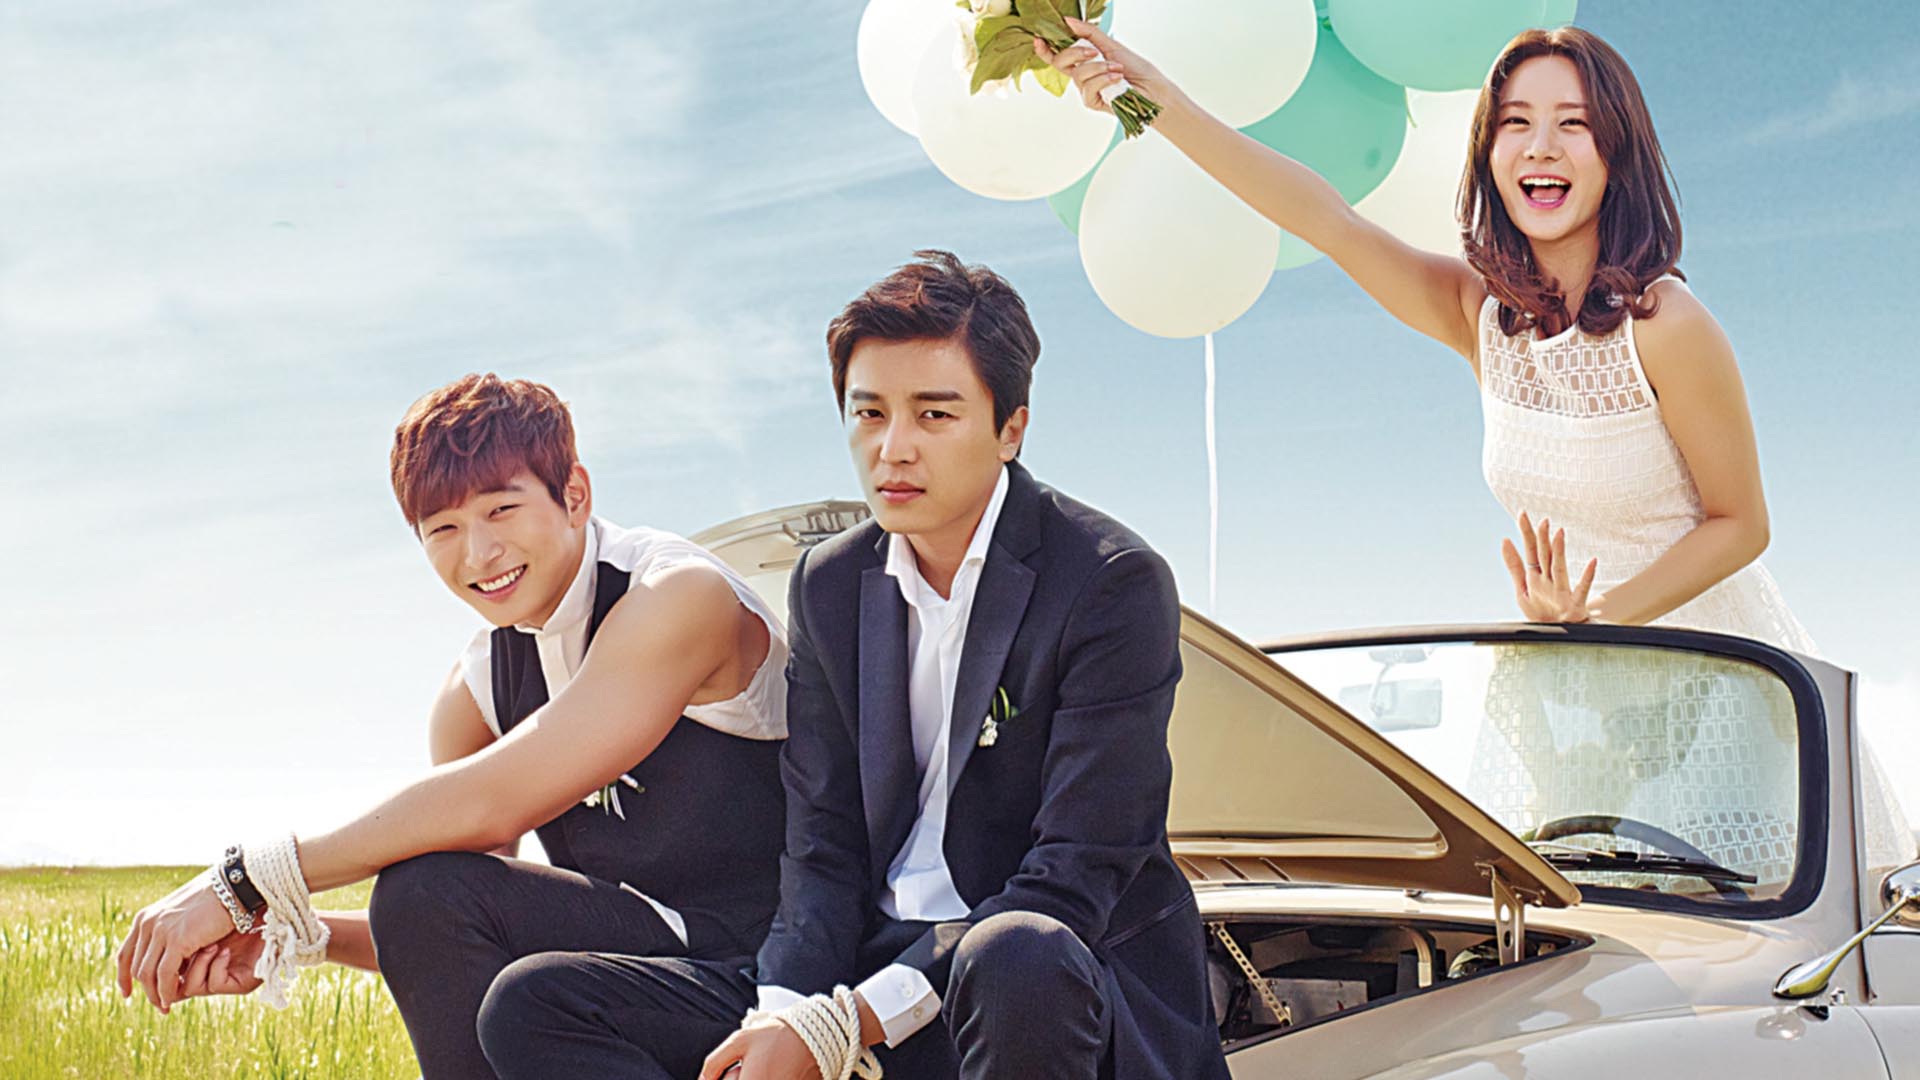 watch marriage not dating eng sub